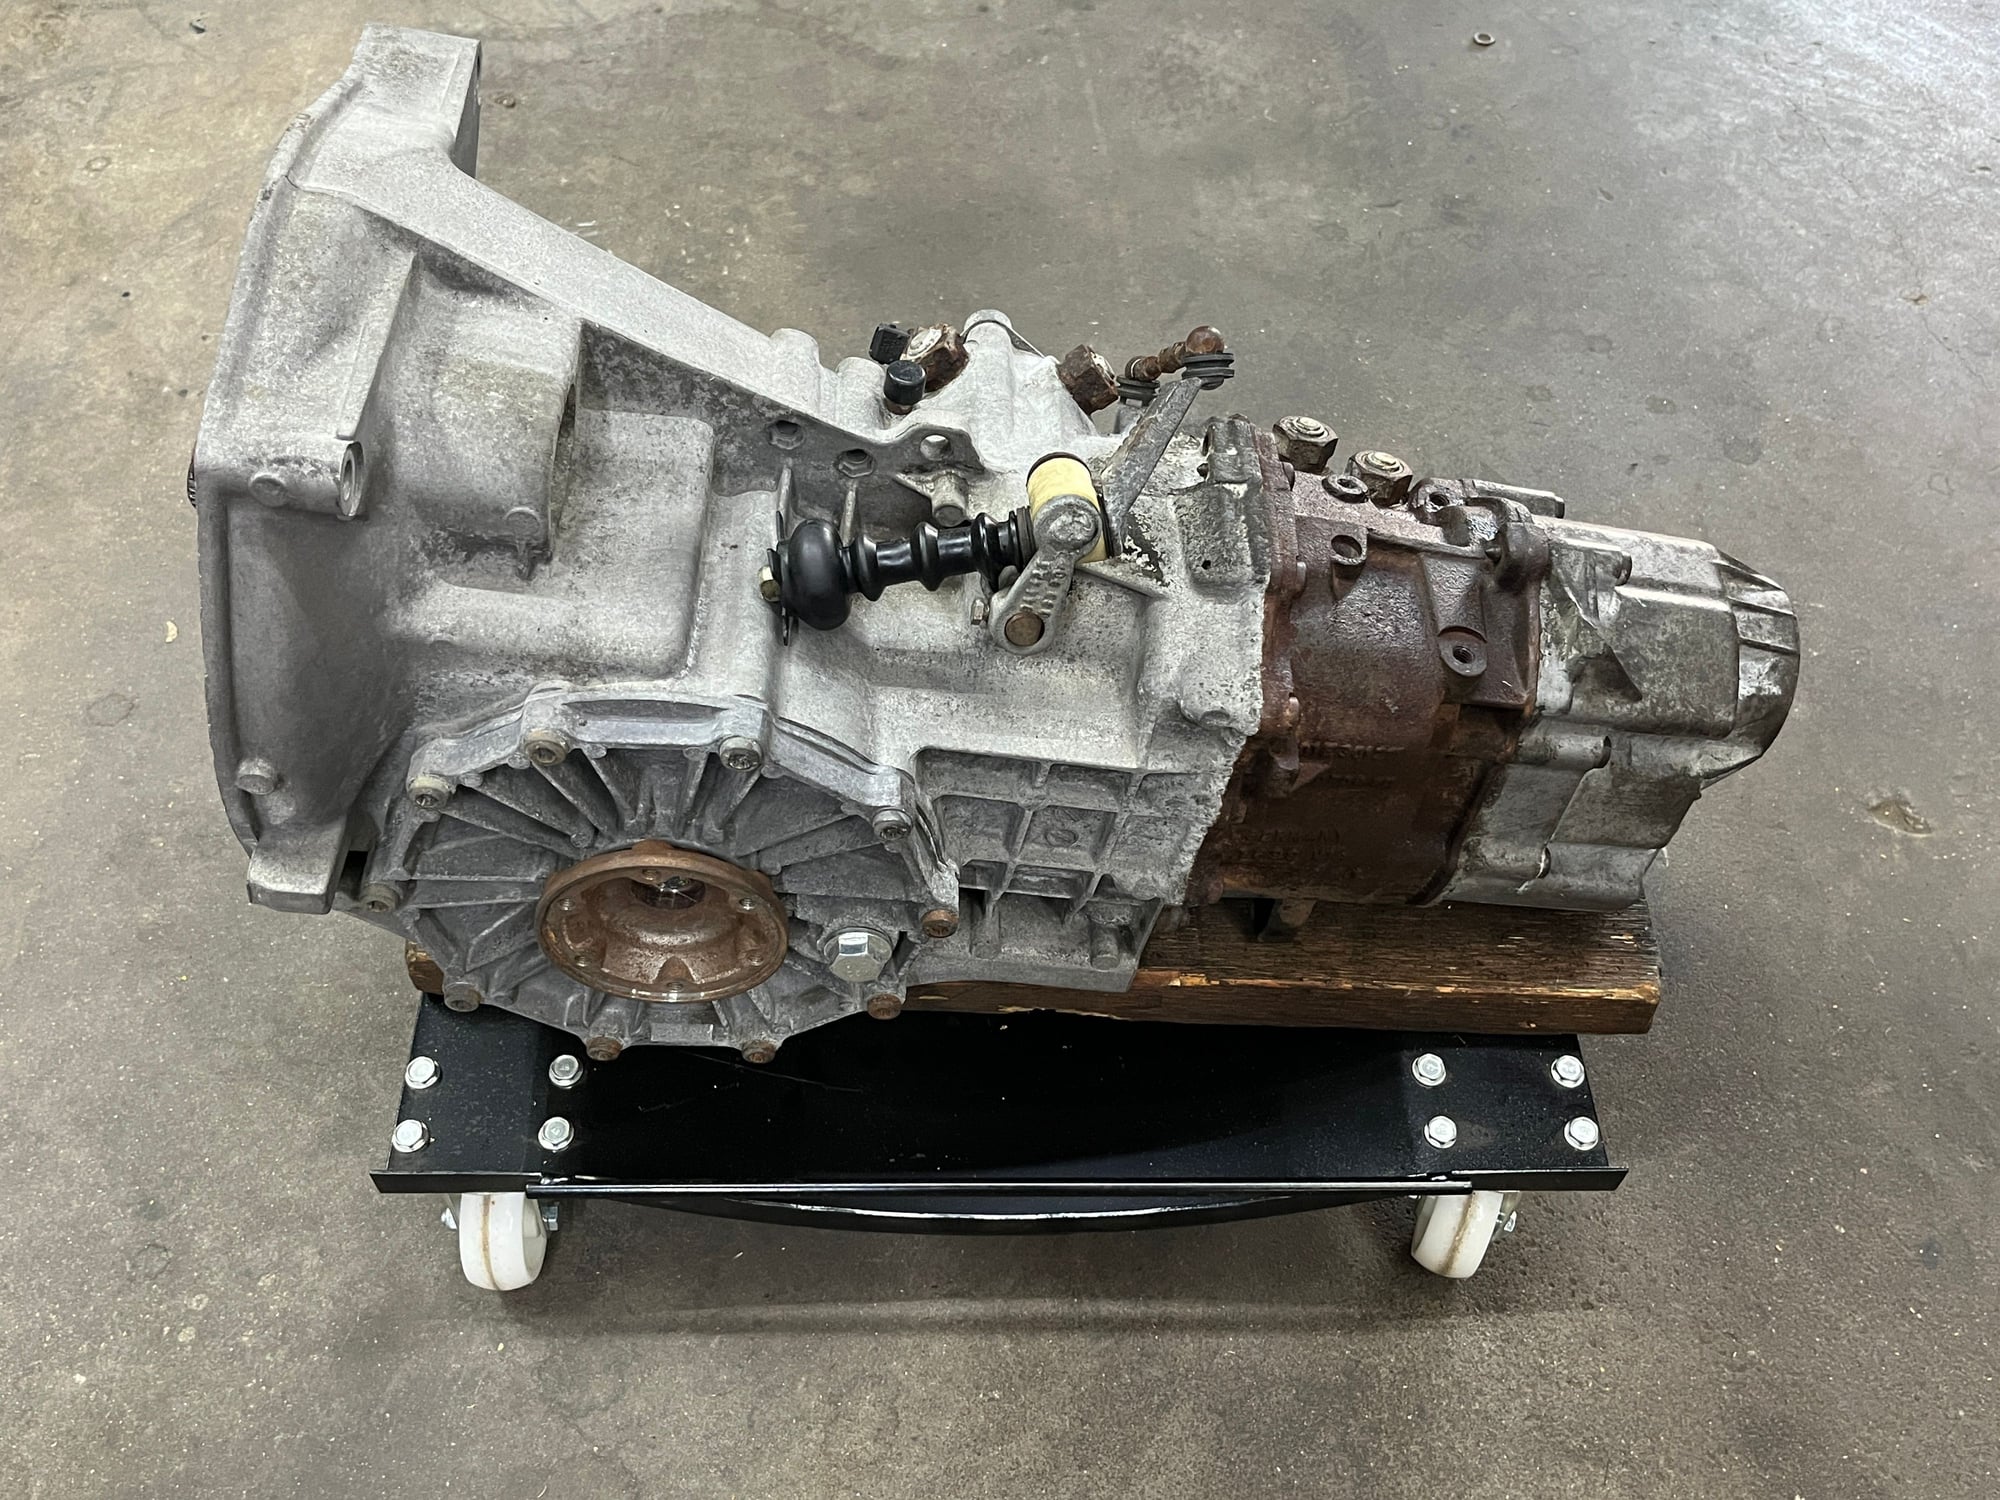 Drivetrain - Porsche 968 6 speed manual transaxle G44 Gearbox - Used - All Years  All Models - All Years  All Models - Dallas, TX 75218, United States